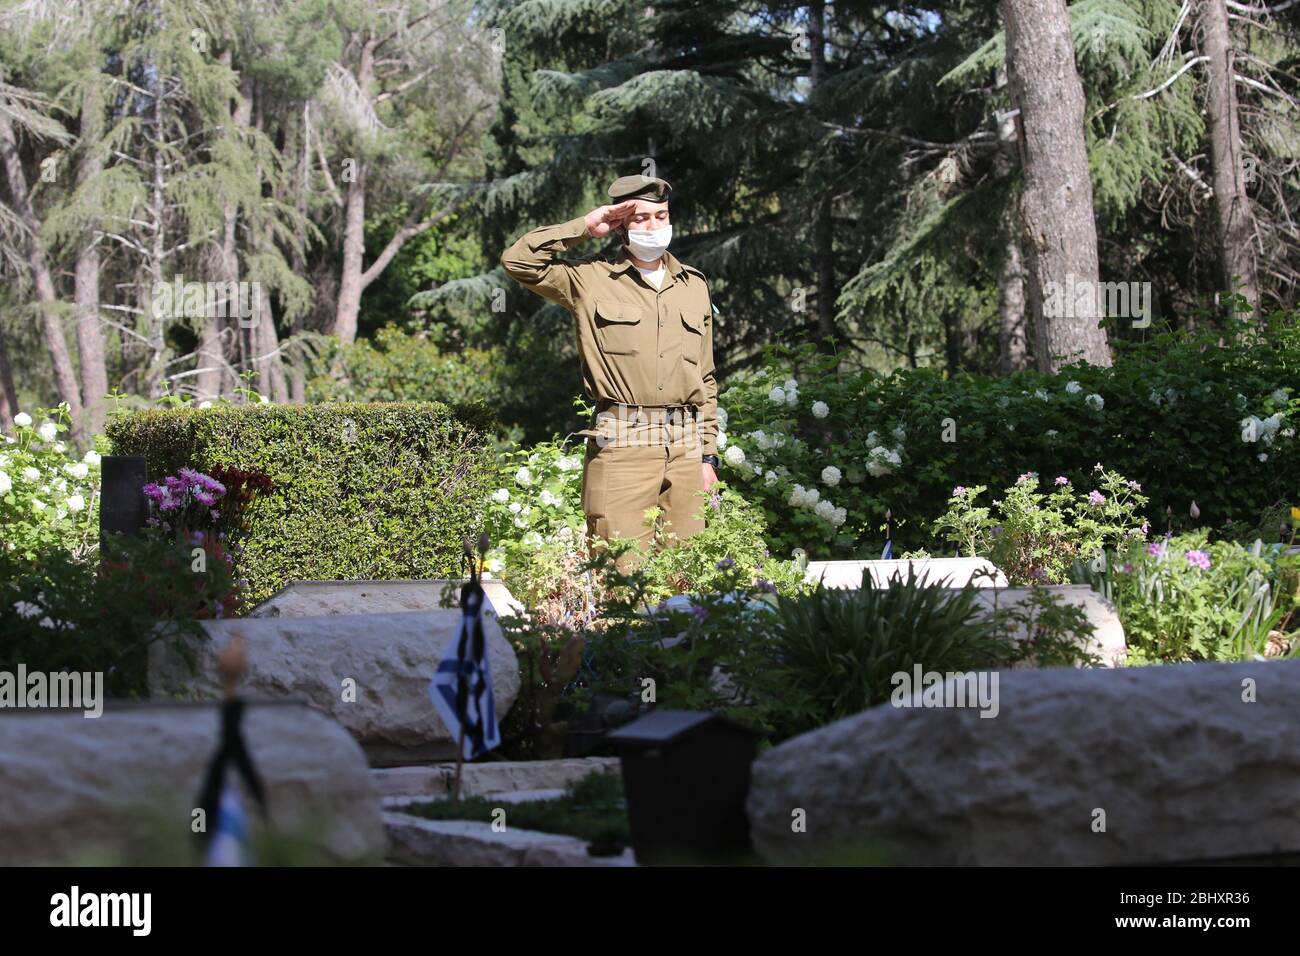 Beijing, China. 27th Apr, 2020. A soldier wearing a protective mask commemorates Israeli fallen soldiers at a military cemetery in Jerusalem on April 27, 2020. Credit: Muammar Awad/Xinhua/Alamy Live News Stock Photo